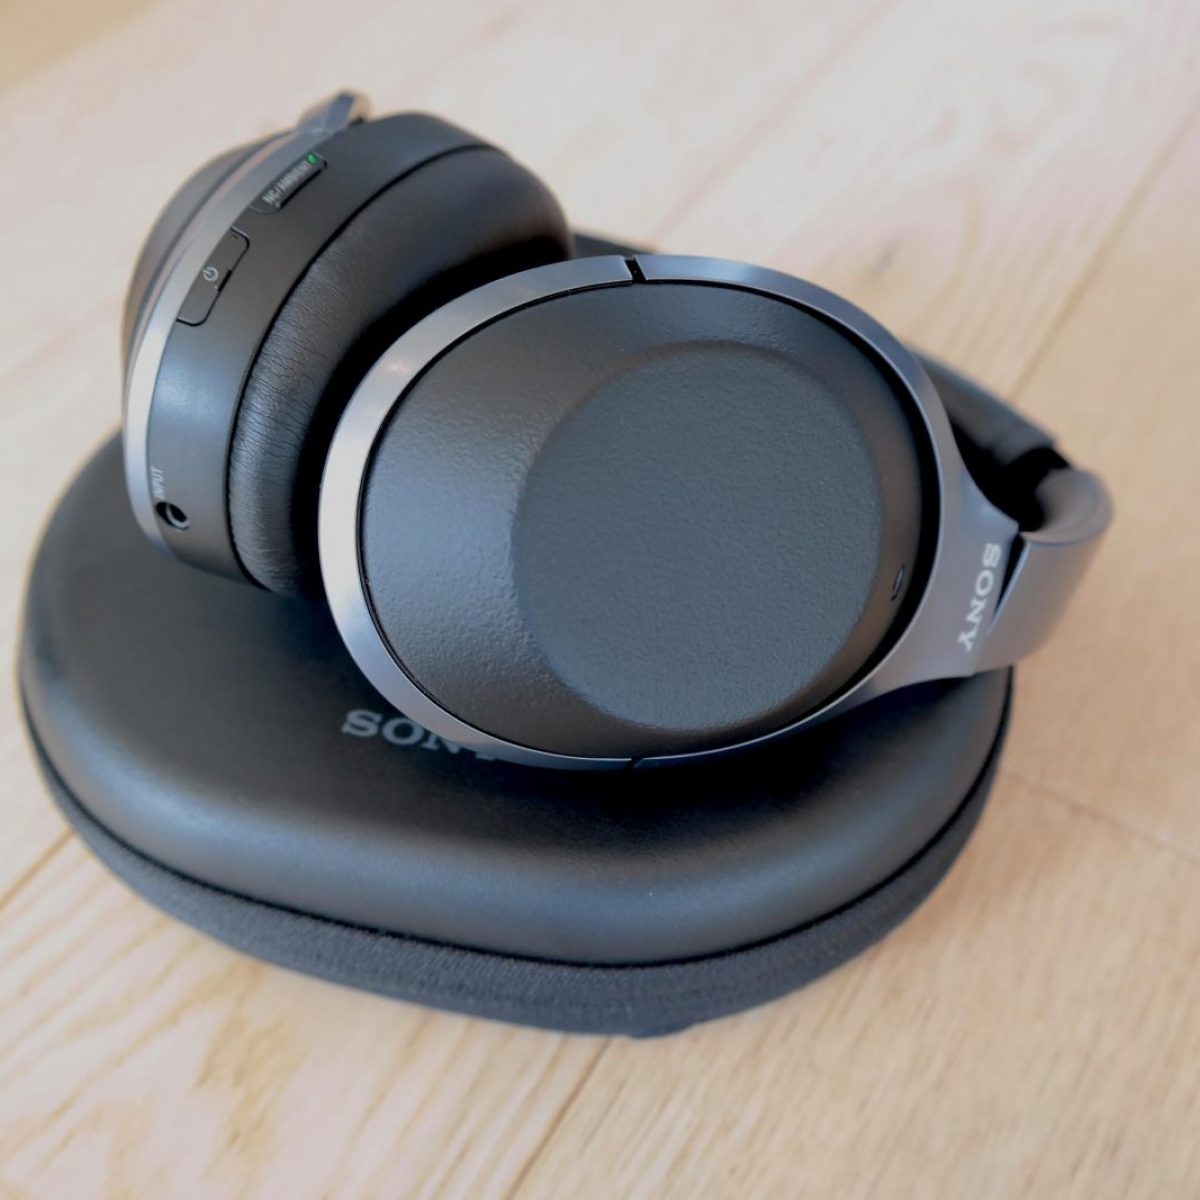 How To Connect Sony Bluetooth Headphones To Any Device Easily Headphonesty